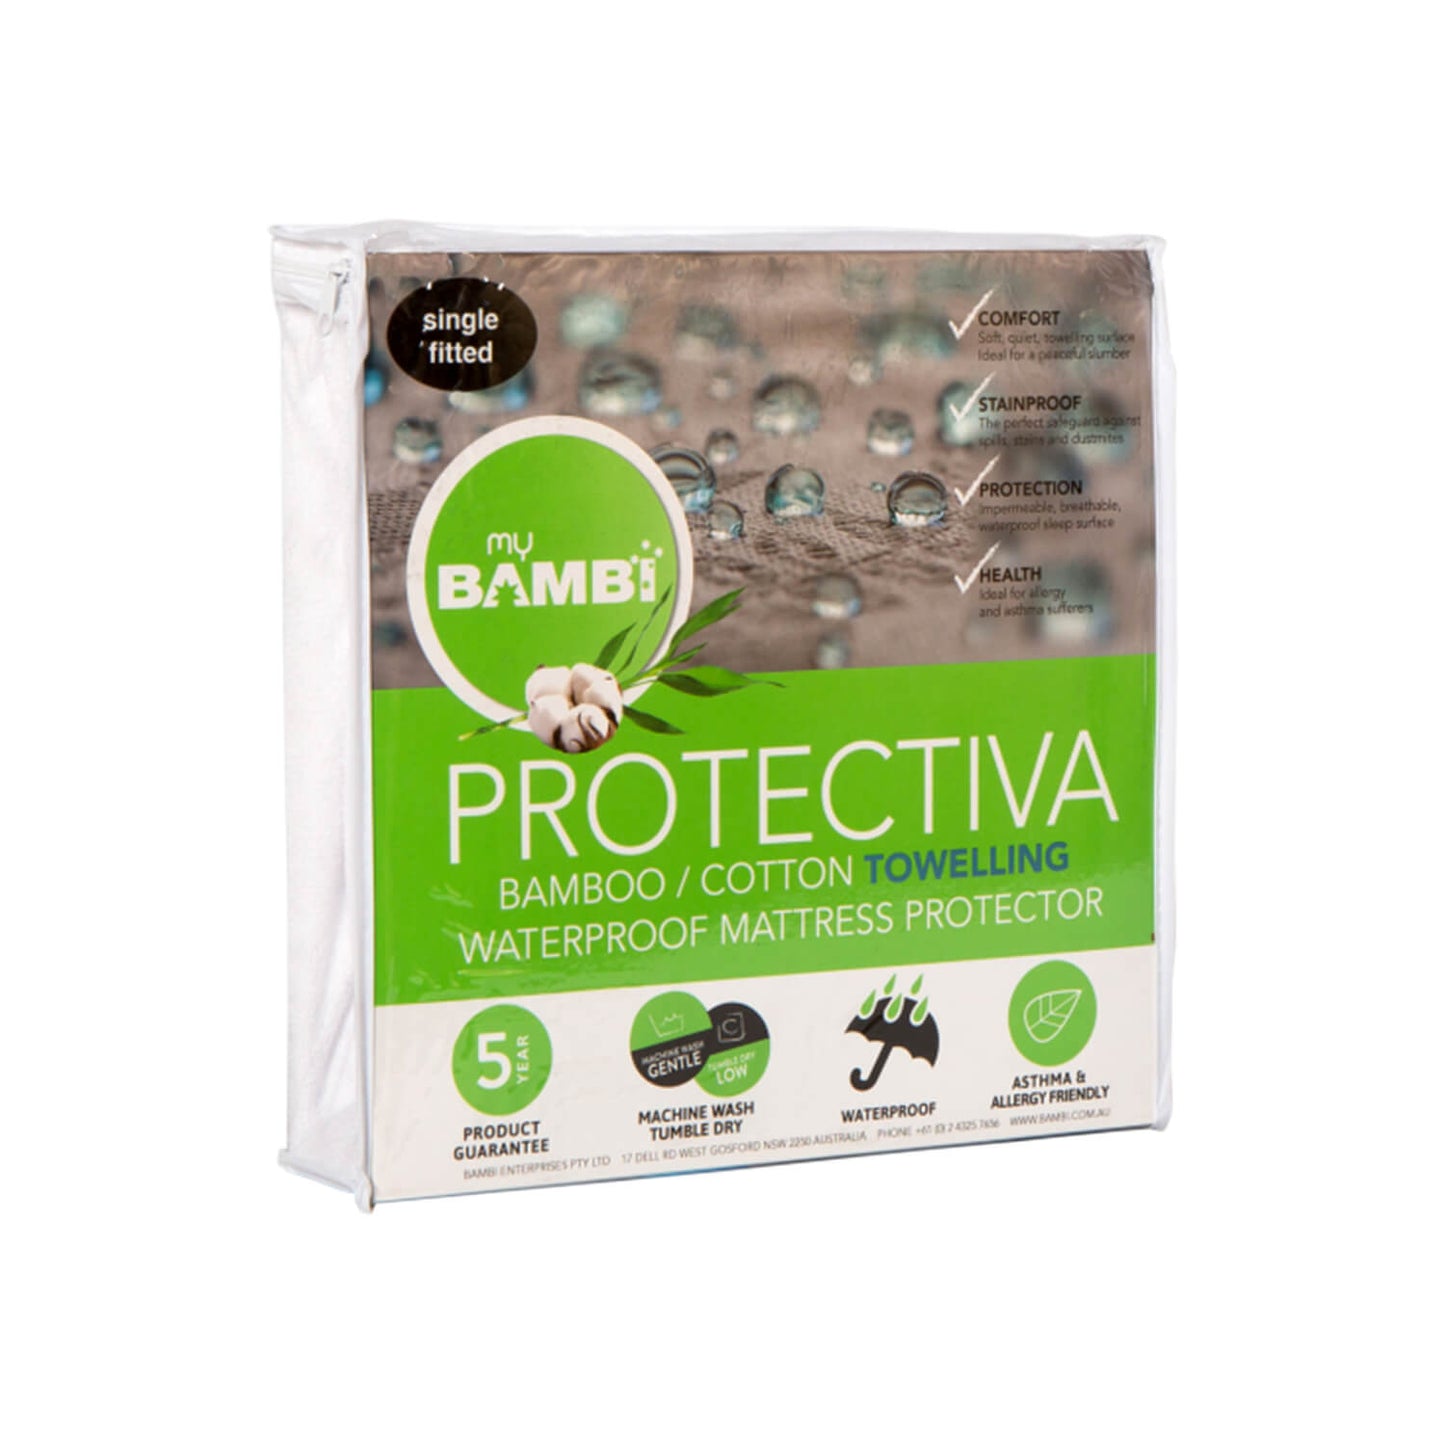 Protectiva Cotton/Bamboo Towelling Waterproof Mattress Protector by Bambi